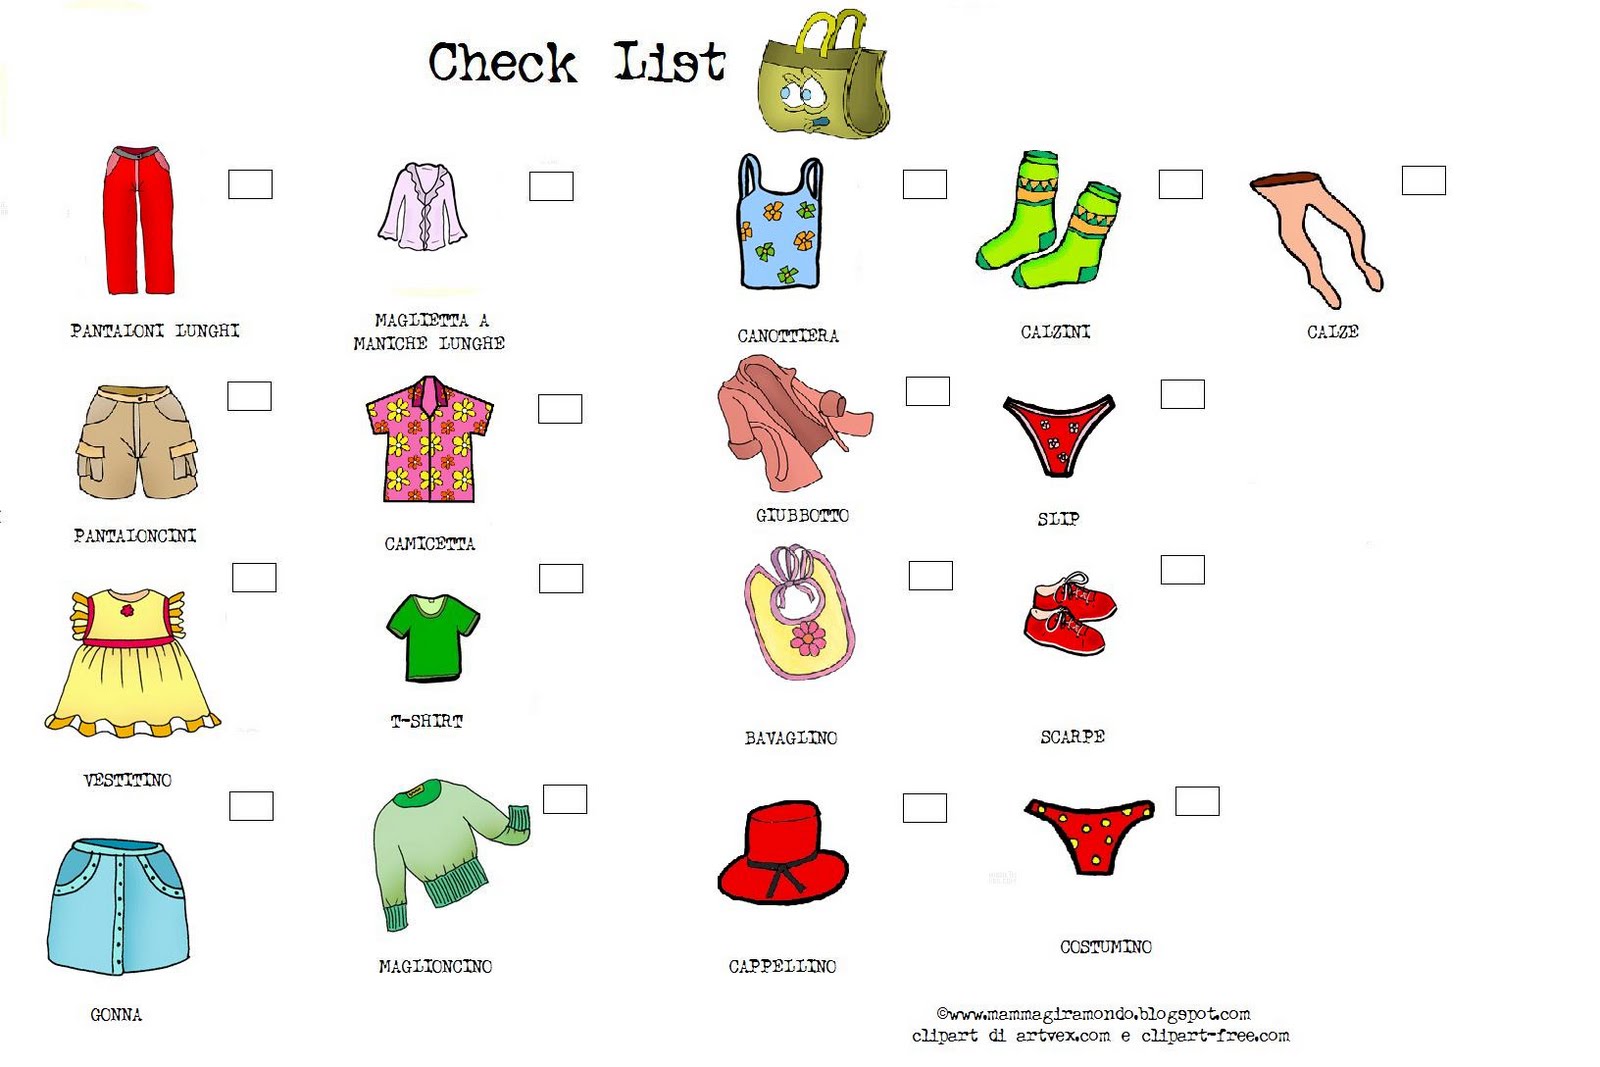 Tongue Tried Bilinguist  Packing Checklist For Kids By Mammagiramondo    